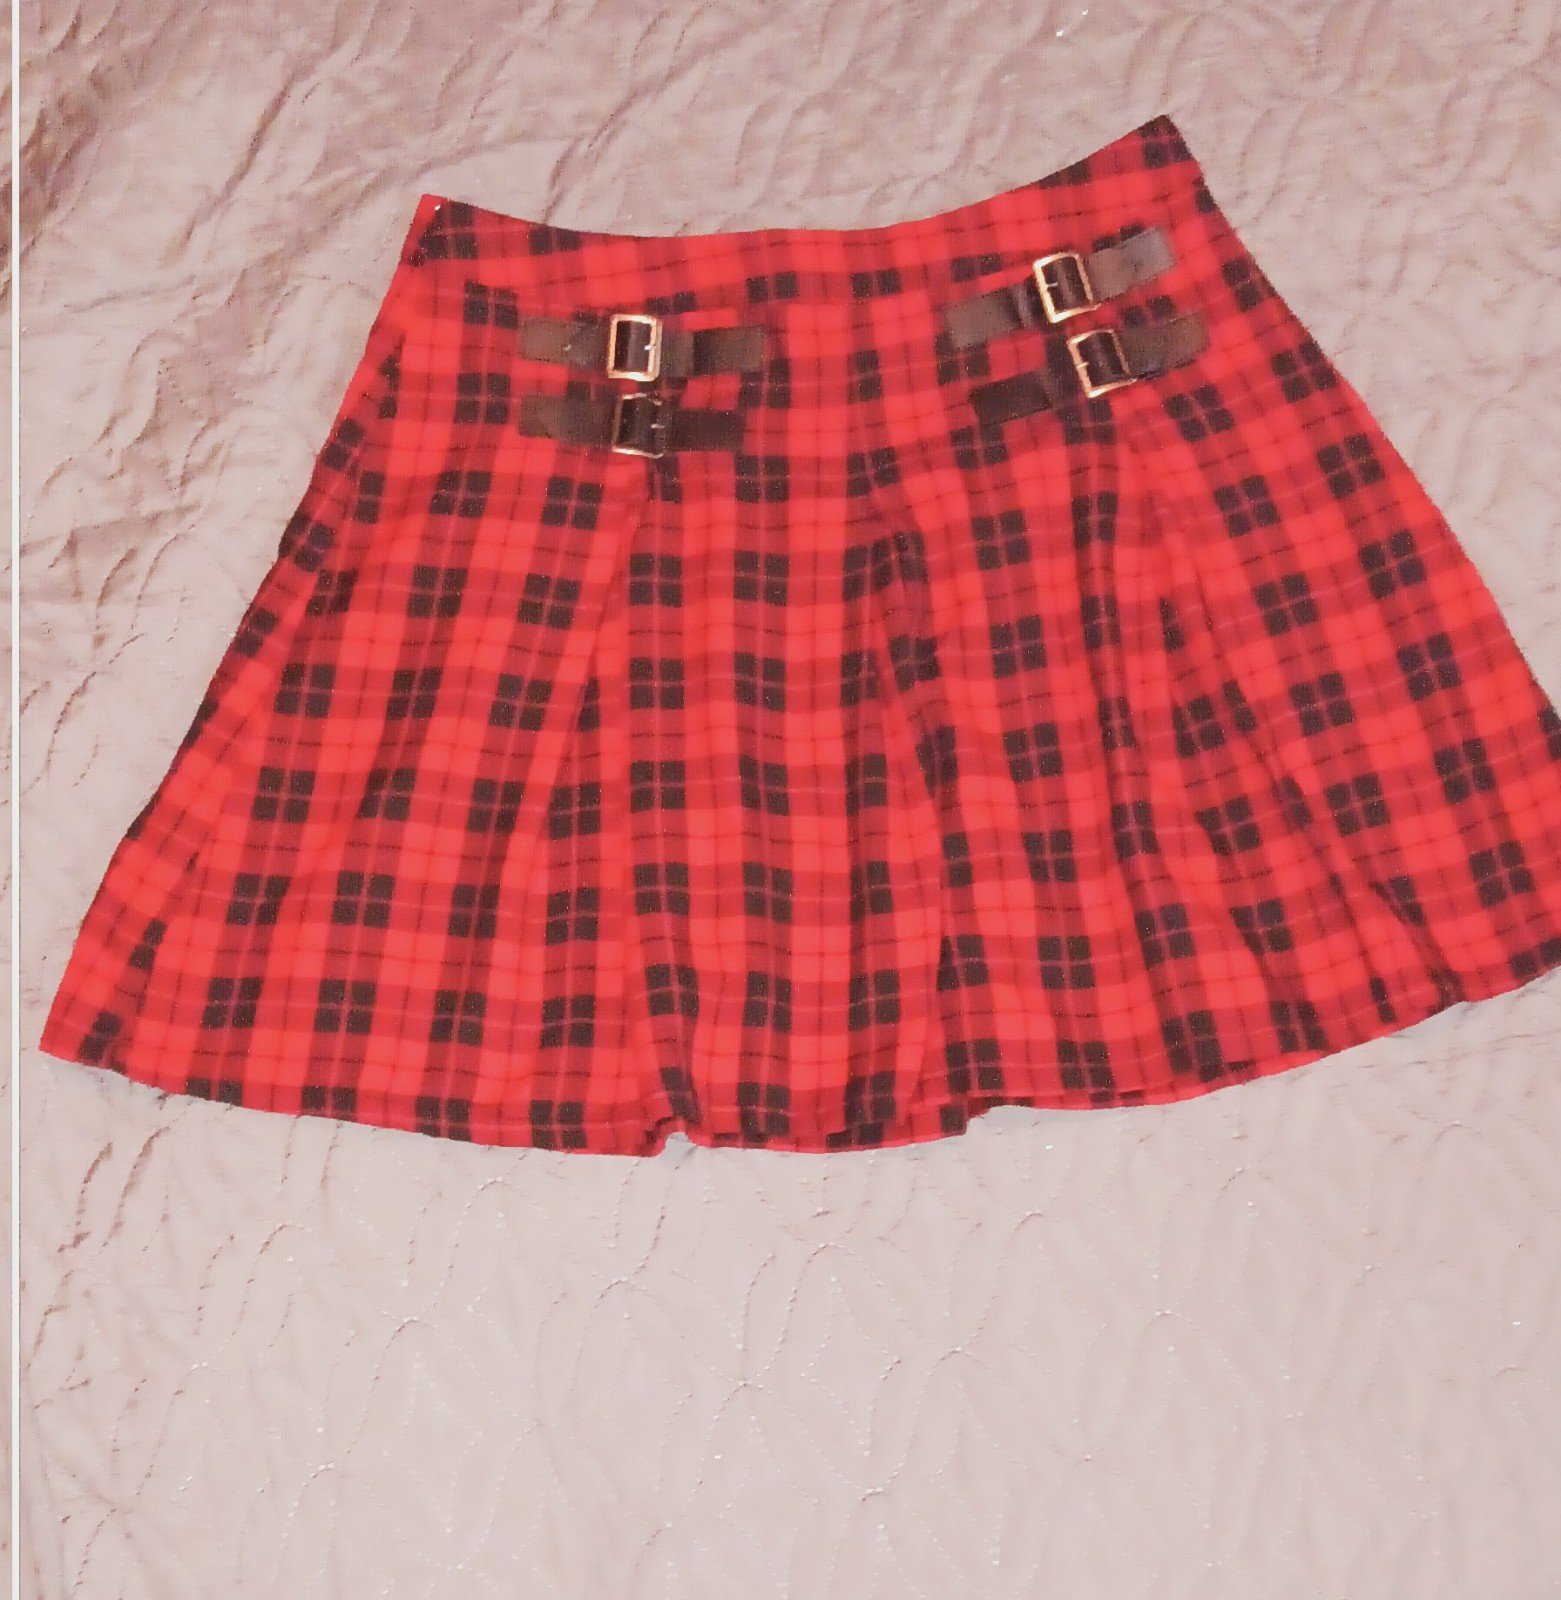 cheapest place to buy  Hot Topic Skirt Mya9G7XyJ Cheap